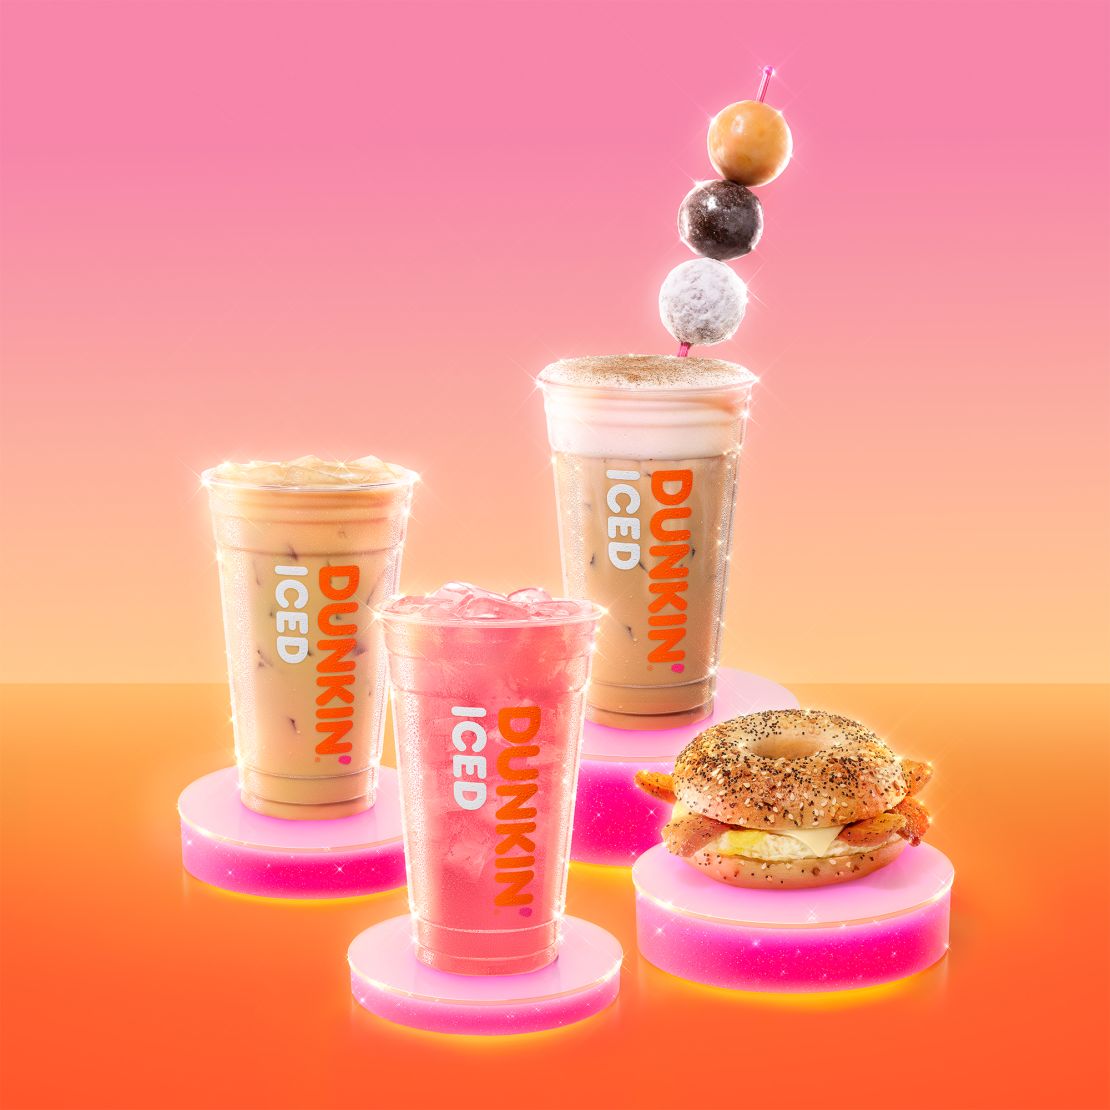 Dunkin' is adding the 